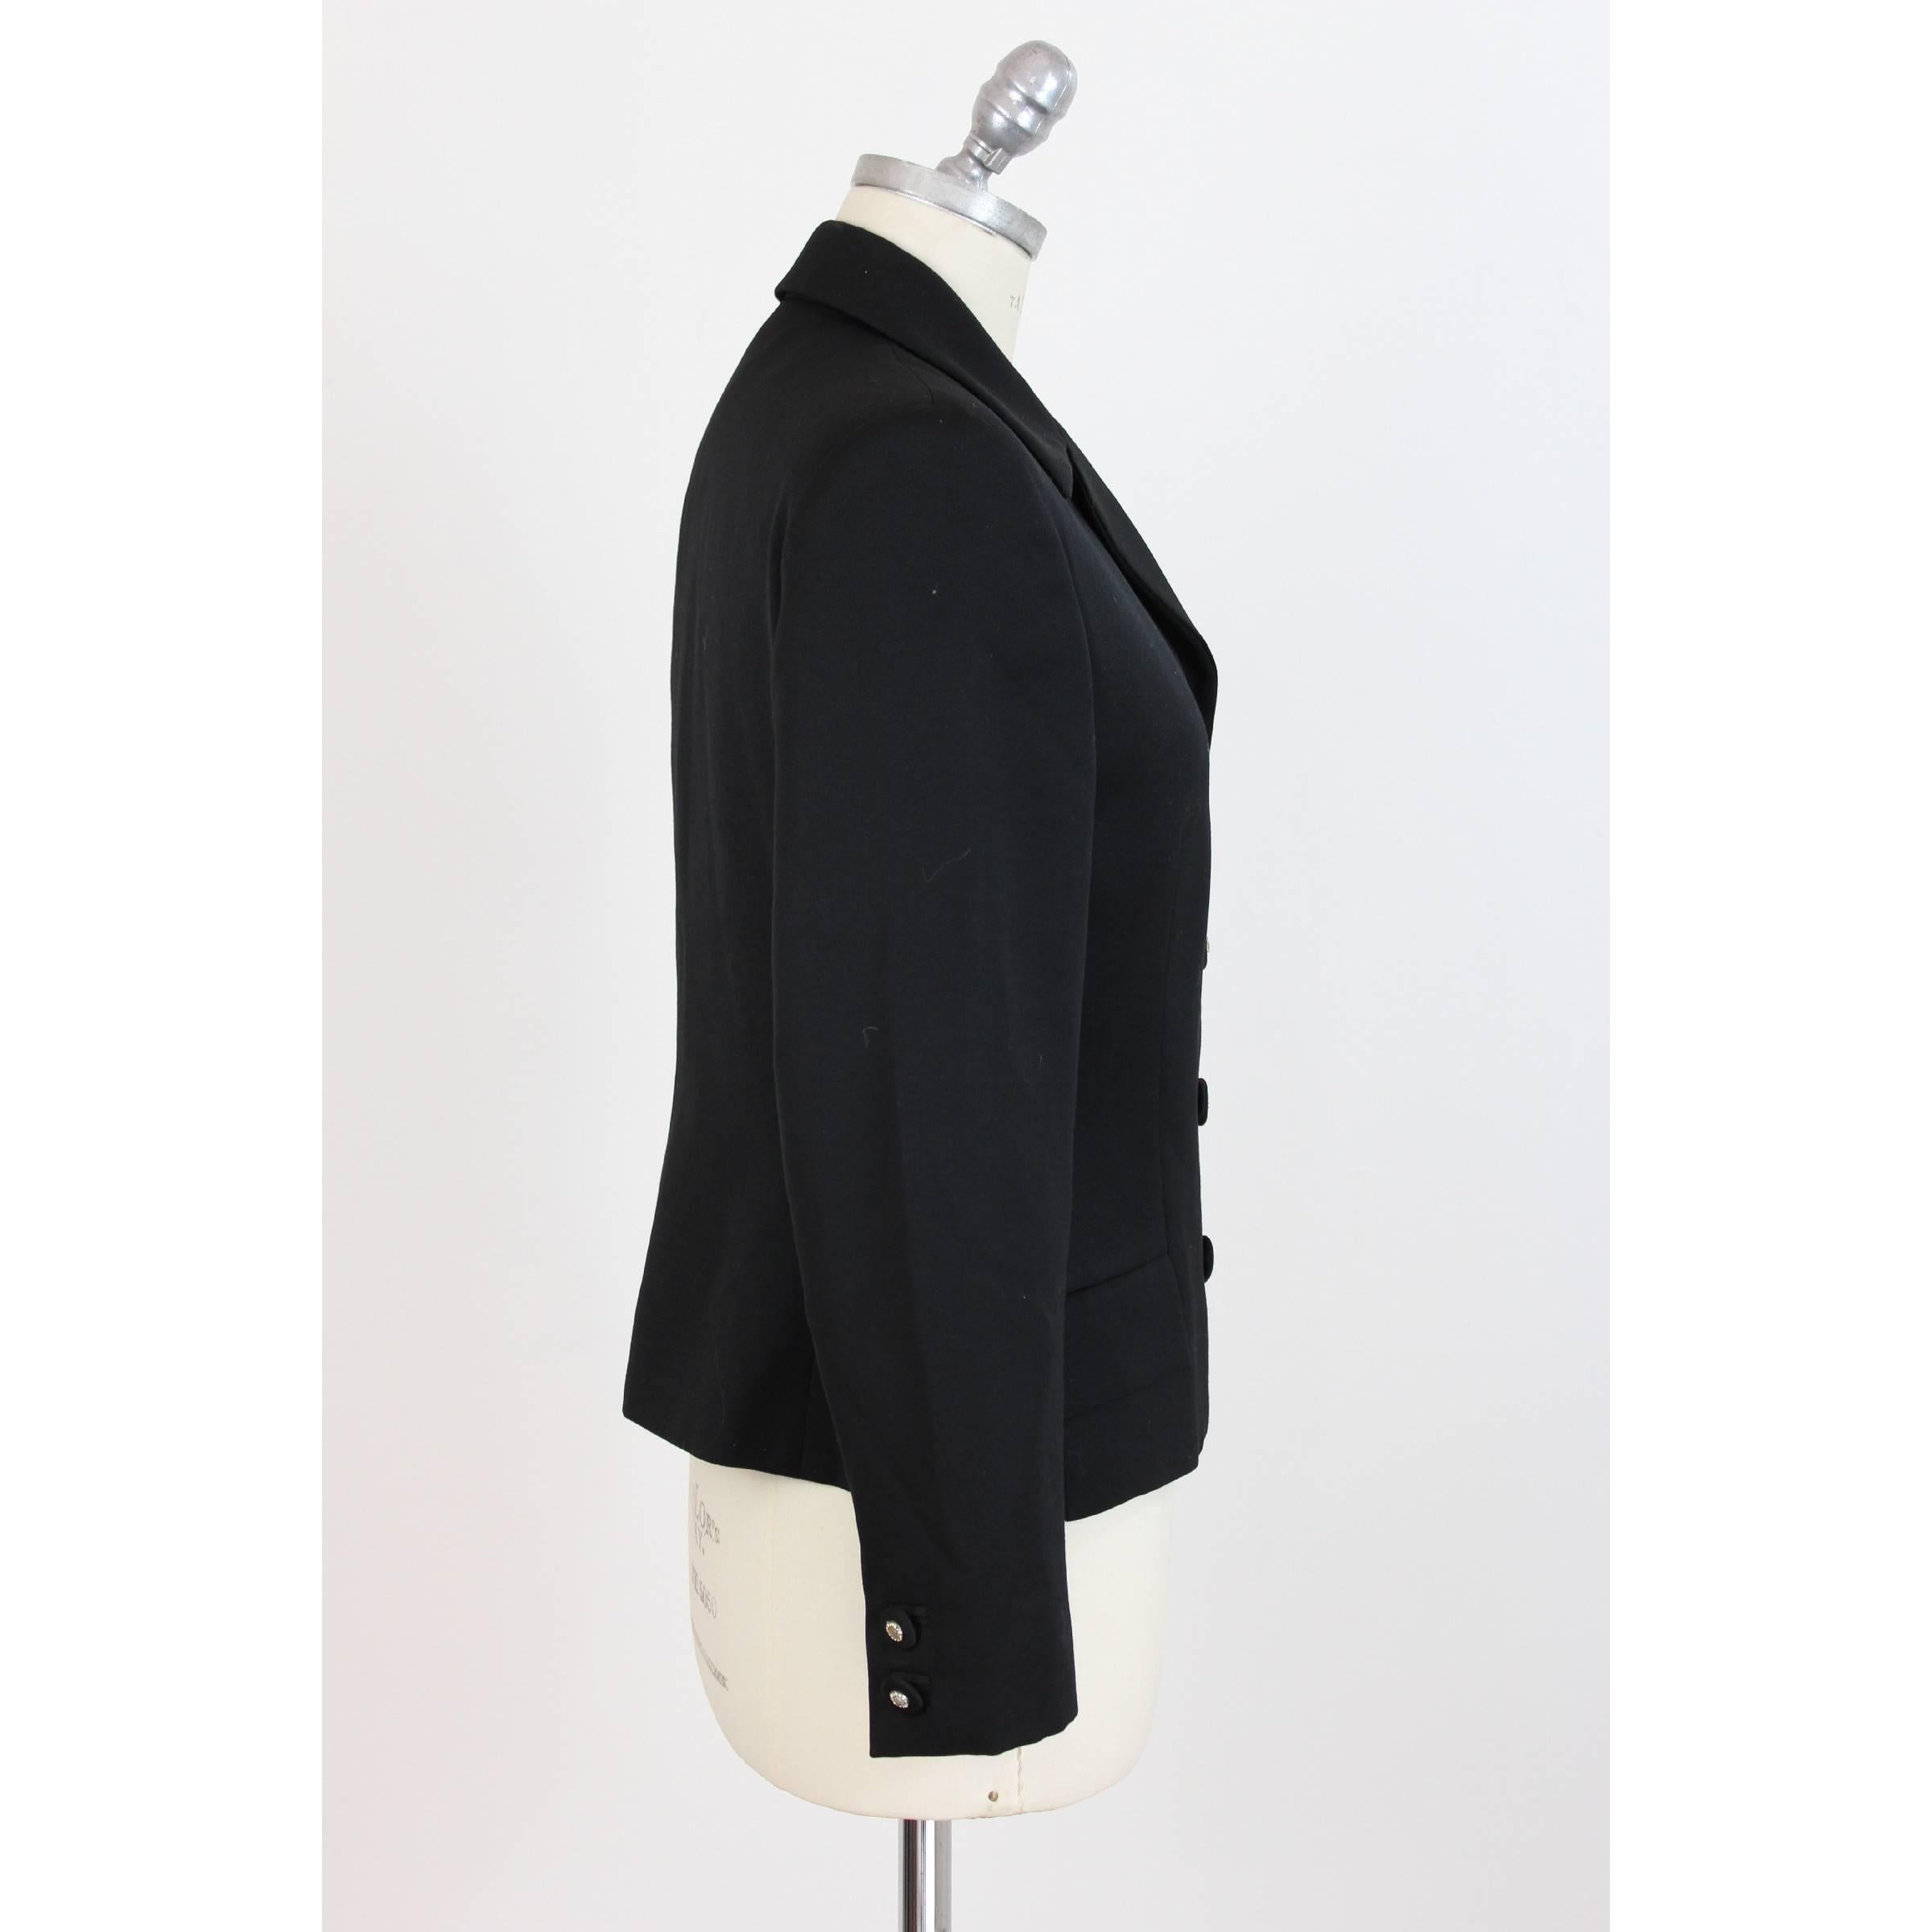 Gianni Versace Black Vintage Wool Silk Jacket  In Excellent Condition For Sale In Brindisi, IT